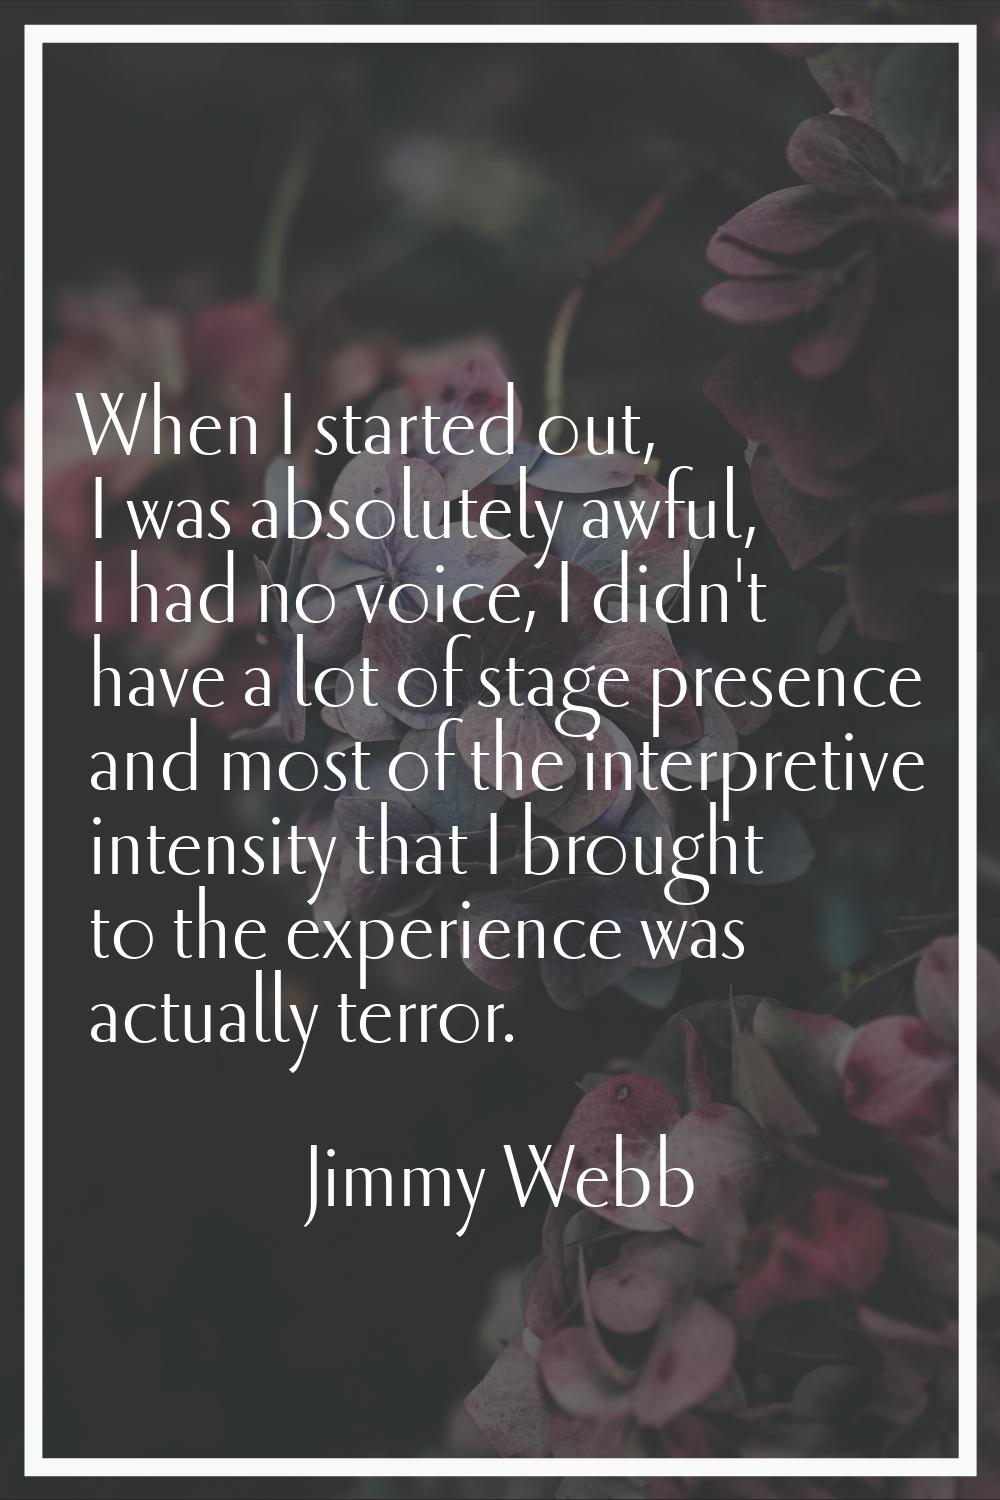 When I started out, I was absolutely awful, I had no voice, I didn't have a lot of stage presence a